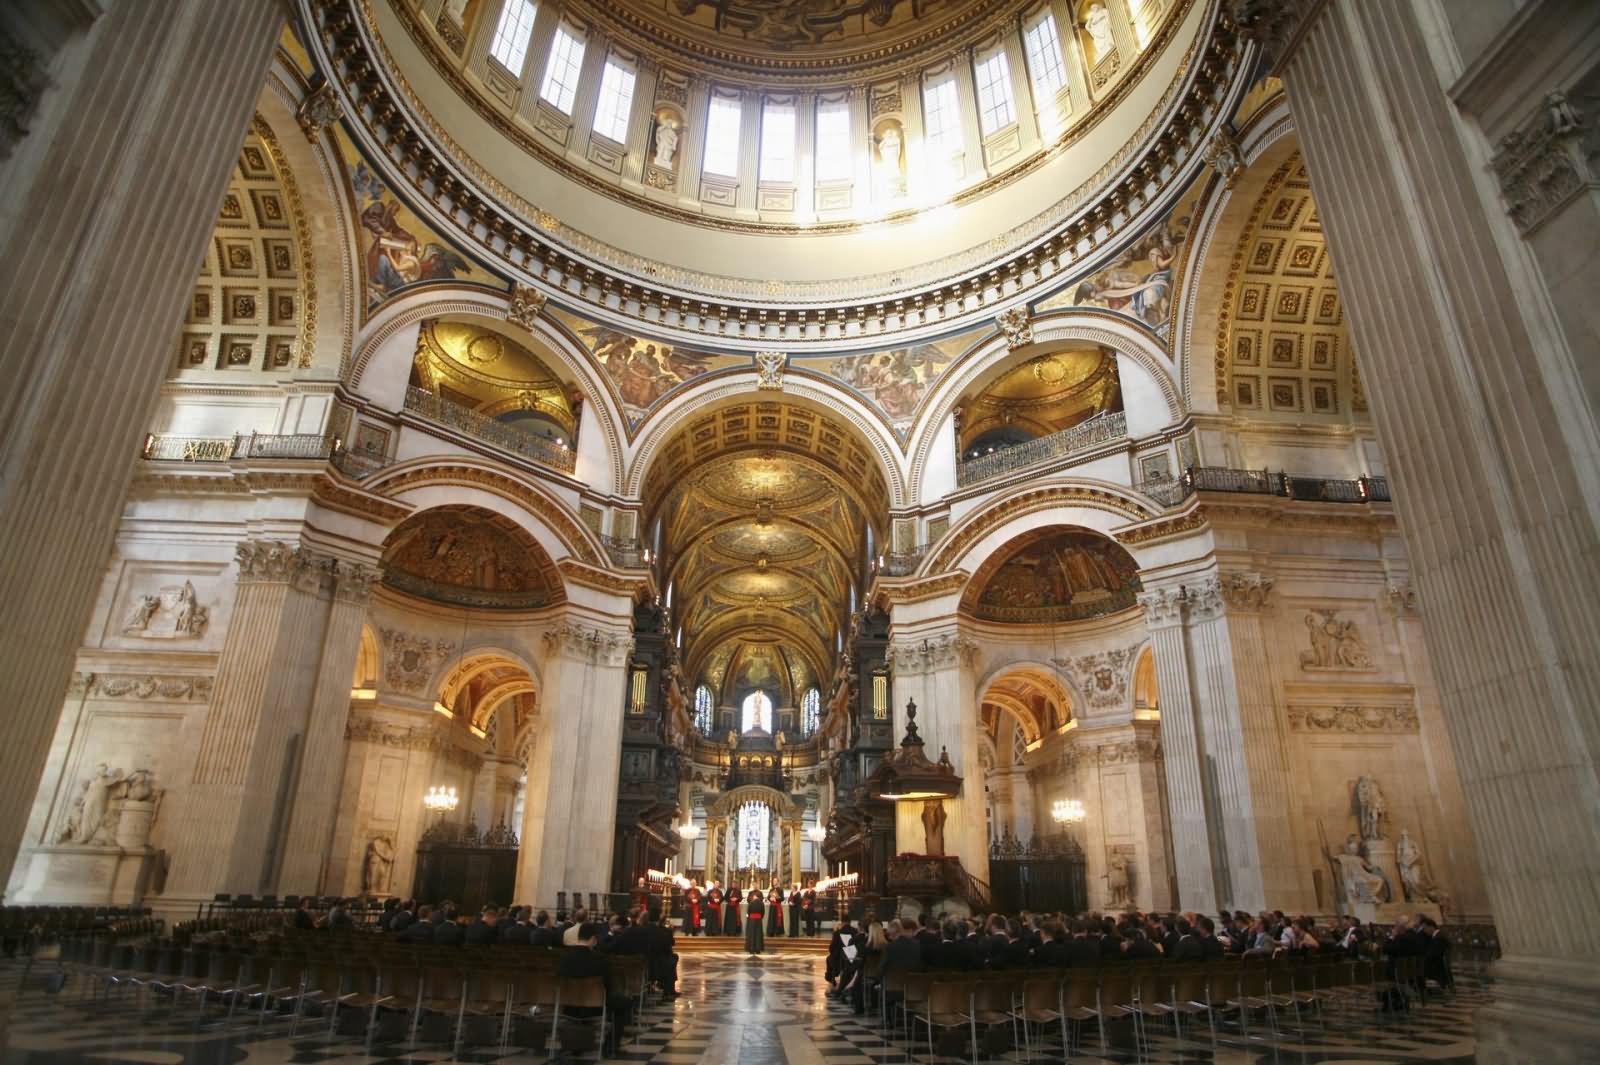 Inside View Of The St Paul's Cathedral